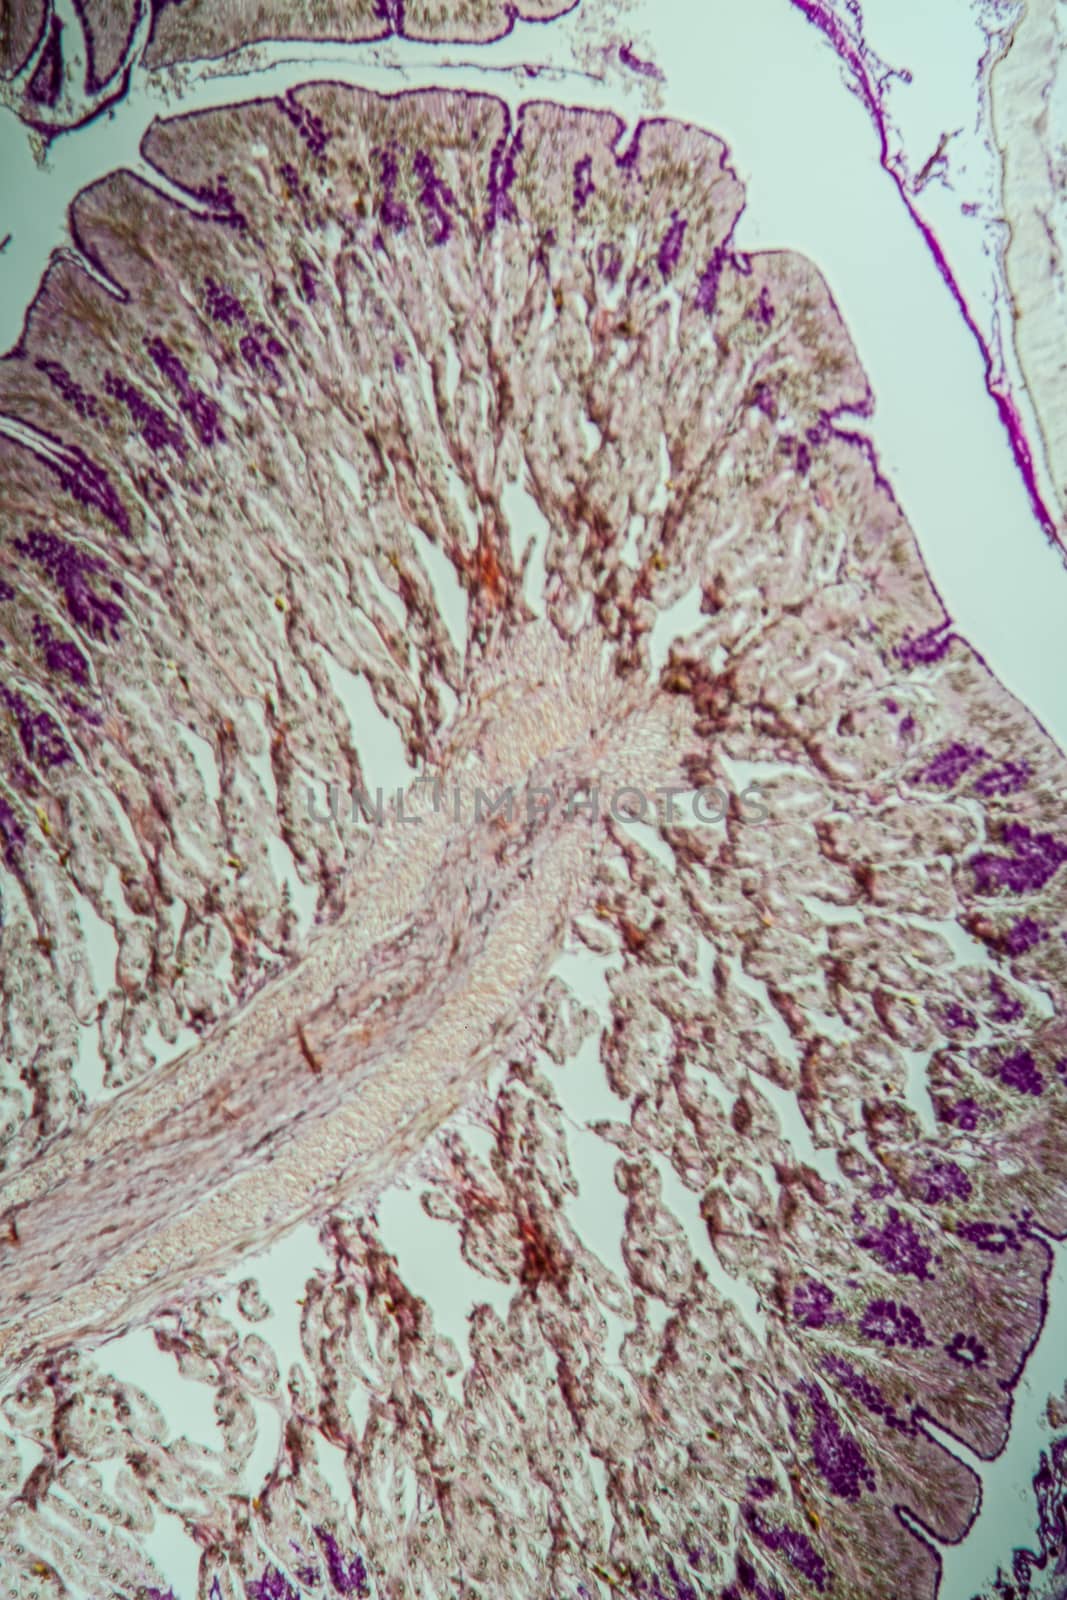 Cross-section through the intestine with glands 100x